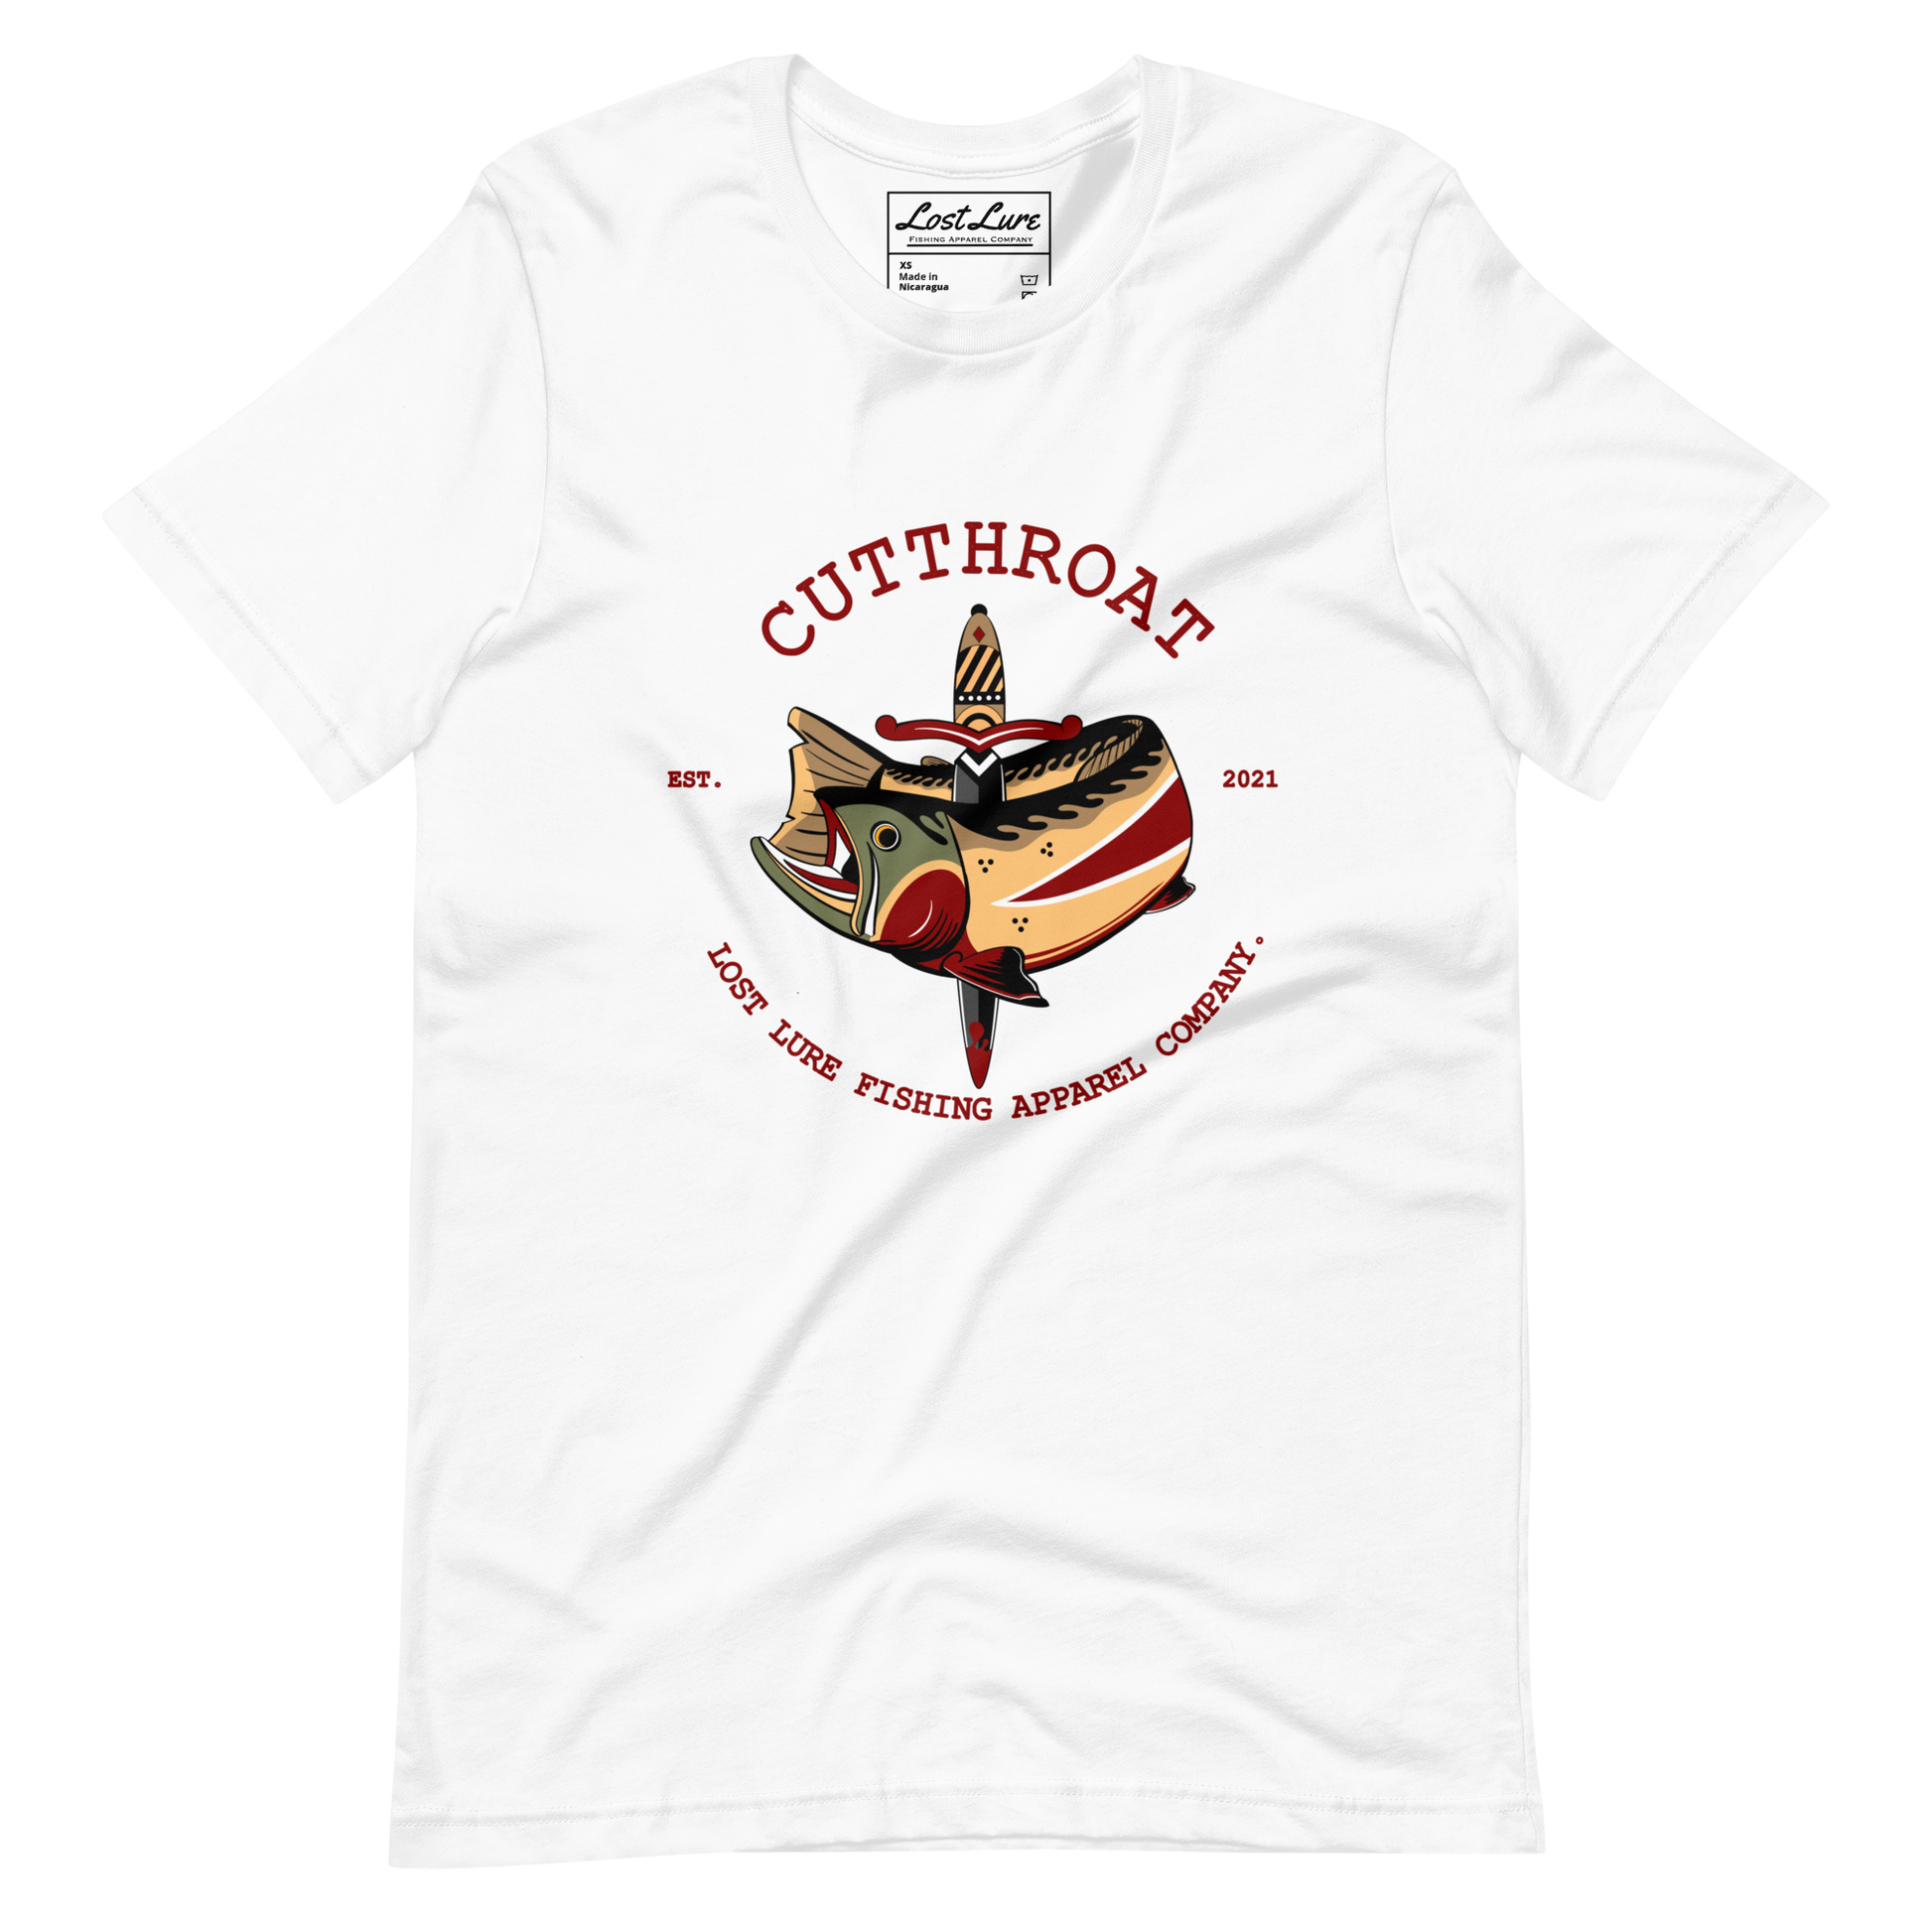 Cutthroat Trout fishing shirt. It’s an American traditional style design with a cutthroat trout and a dagger. The shirt reads Cutthroat trout, est. 2021, lost lure fishing apparel company. The fishing design is on the front of the shirt. White shirt